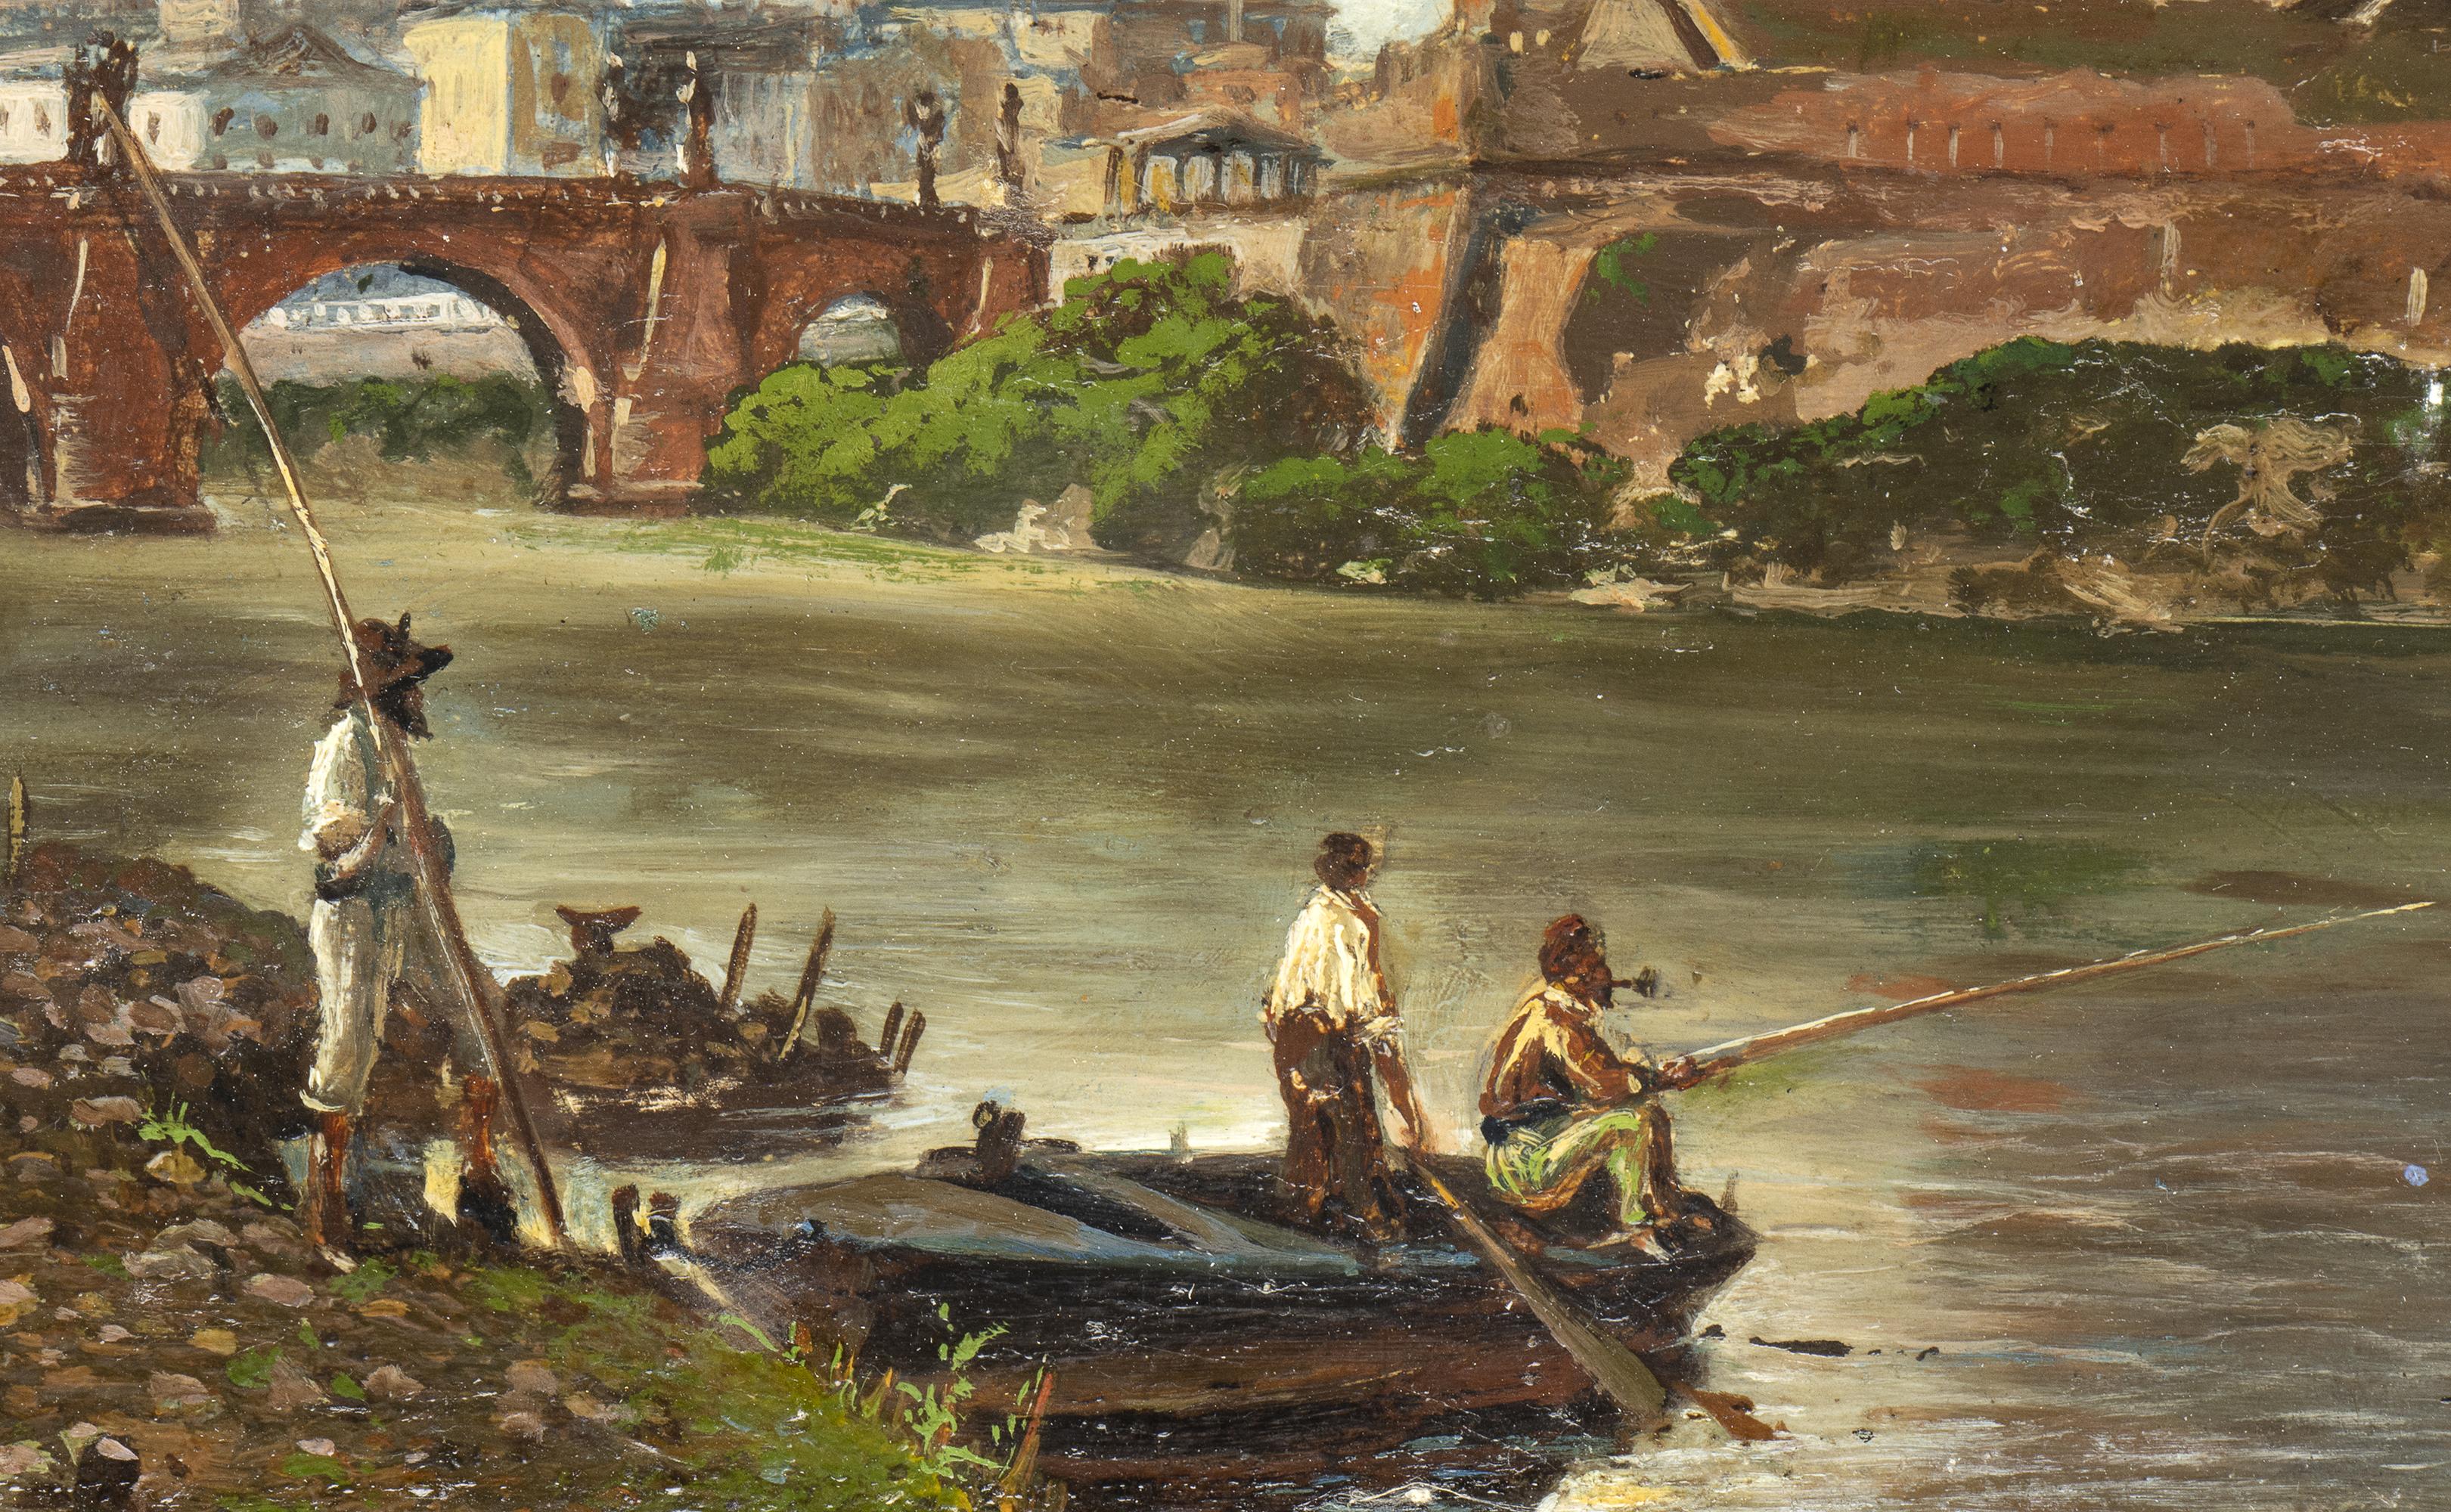 Landscape Oil Painting View of Rome Caste Sant'Angelo And River Tiber Grand Tour 2